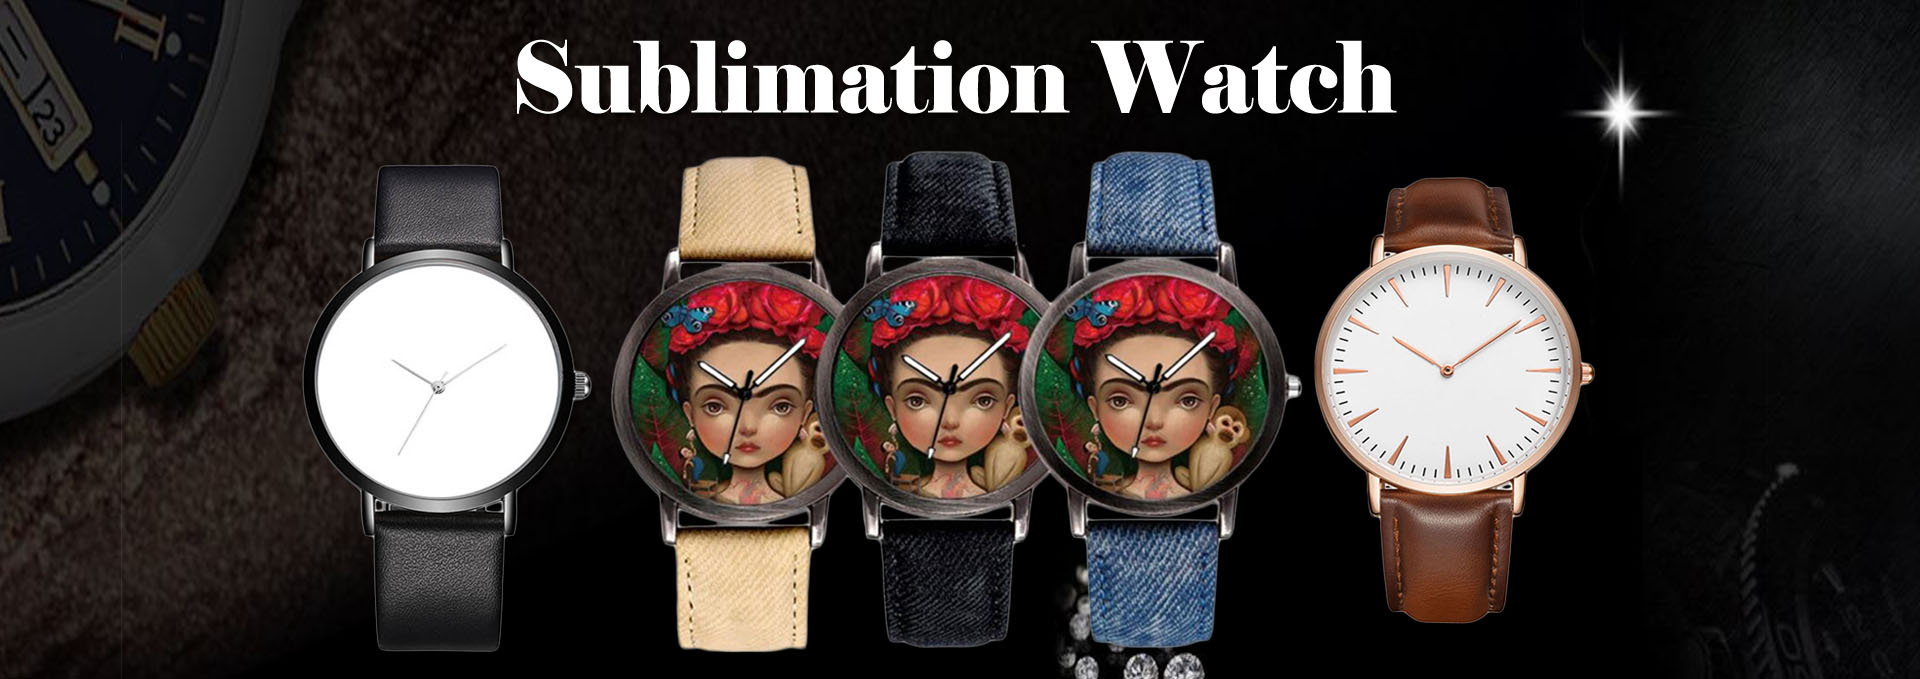 Sublimation Watch